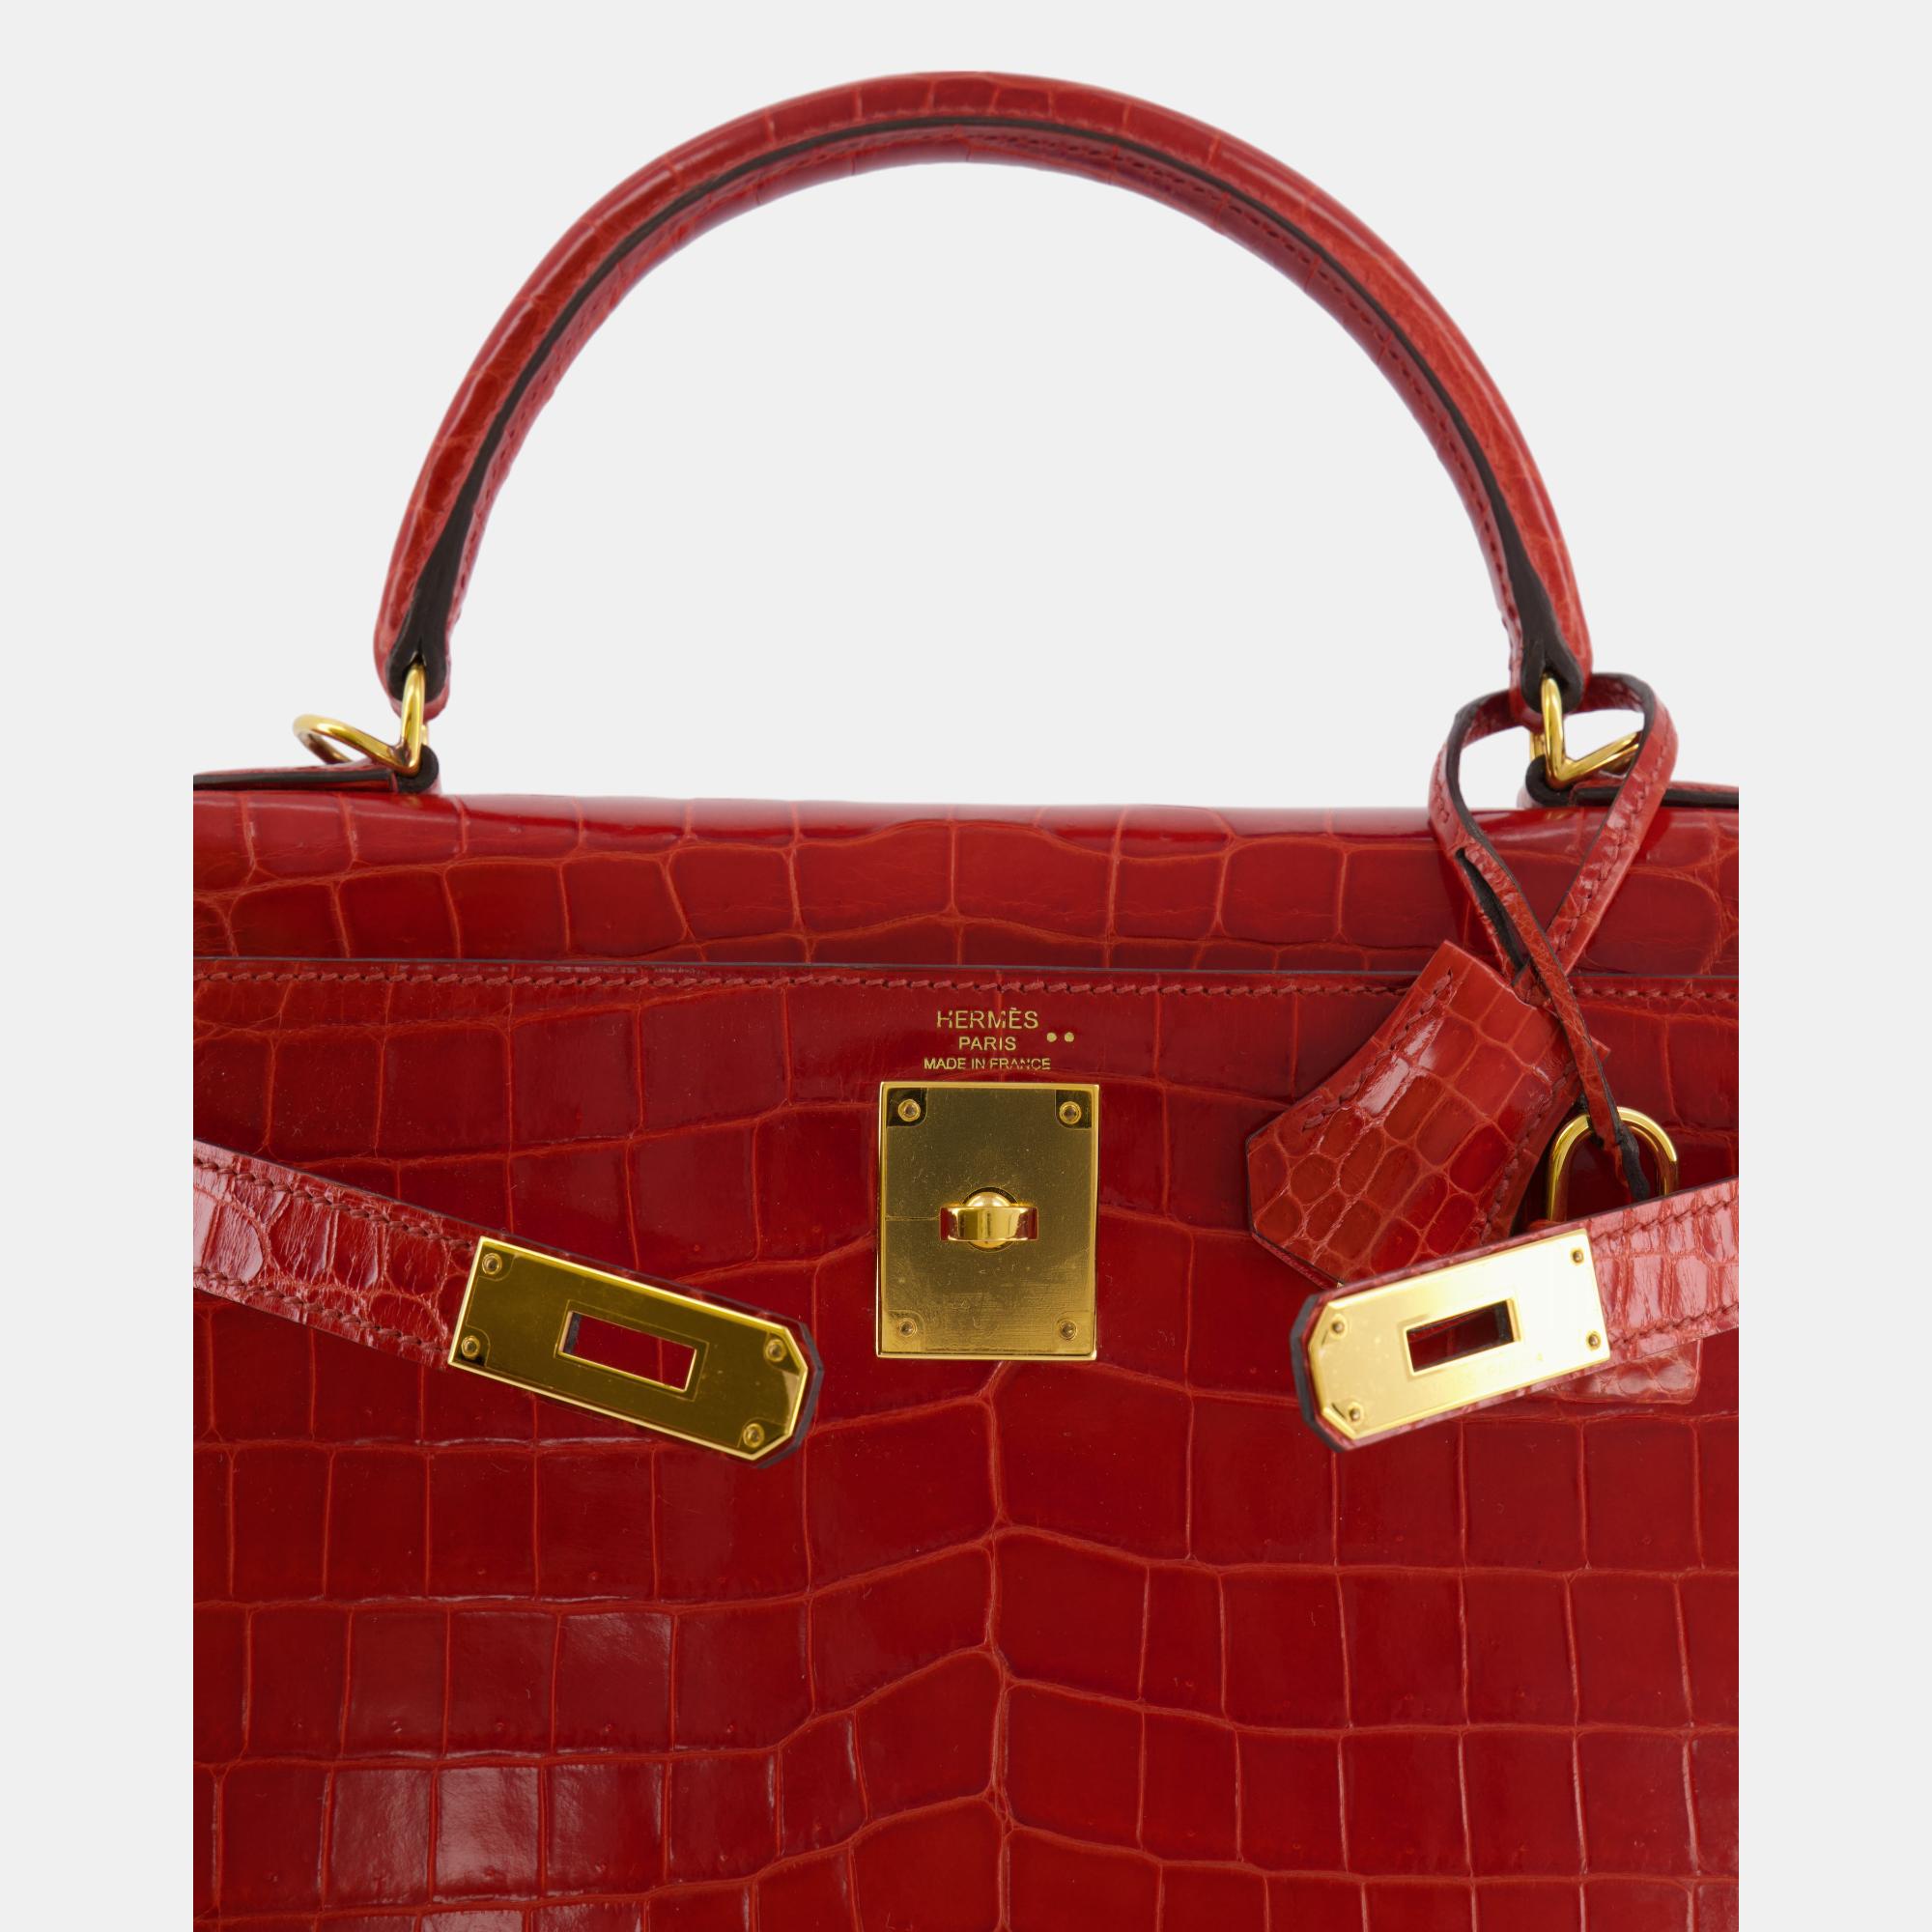 Hermes Kelly Bag 28cm In Sanguine Crocodile Niloticus Leather With Gold Hardware